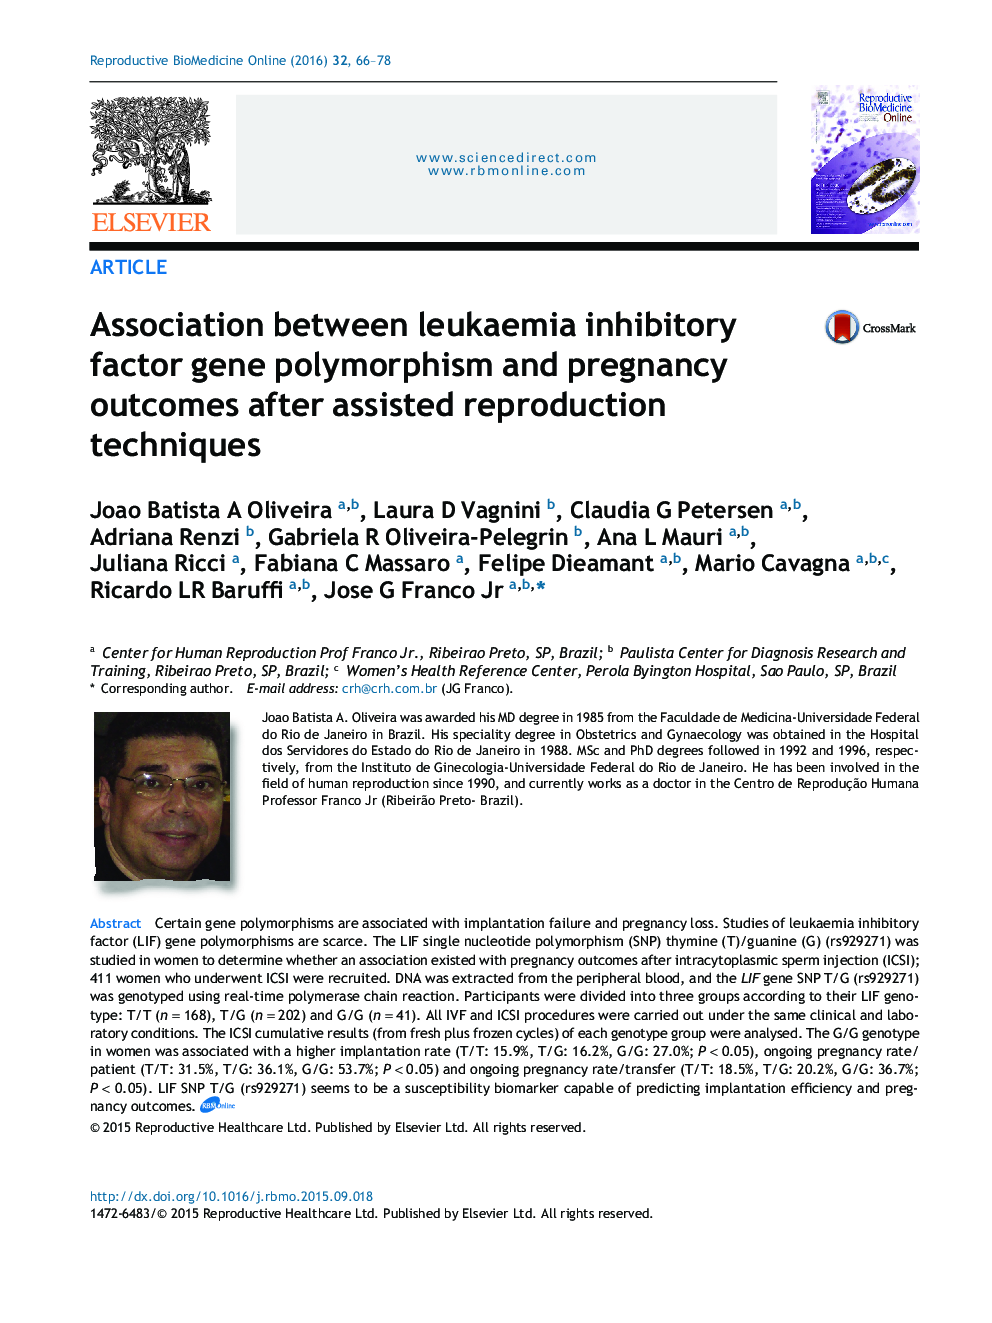 Association between leukaemia inhibitory factor gene polymorphism and pregnancy outcomes after assisted reproduction techniques